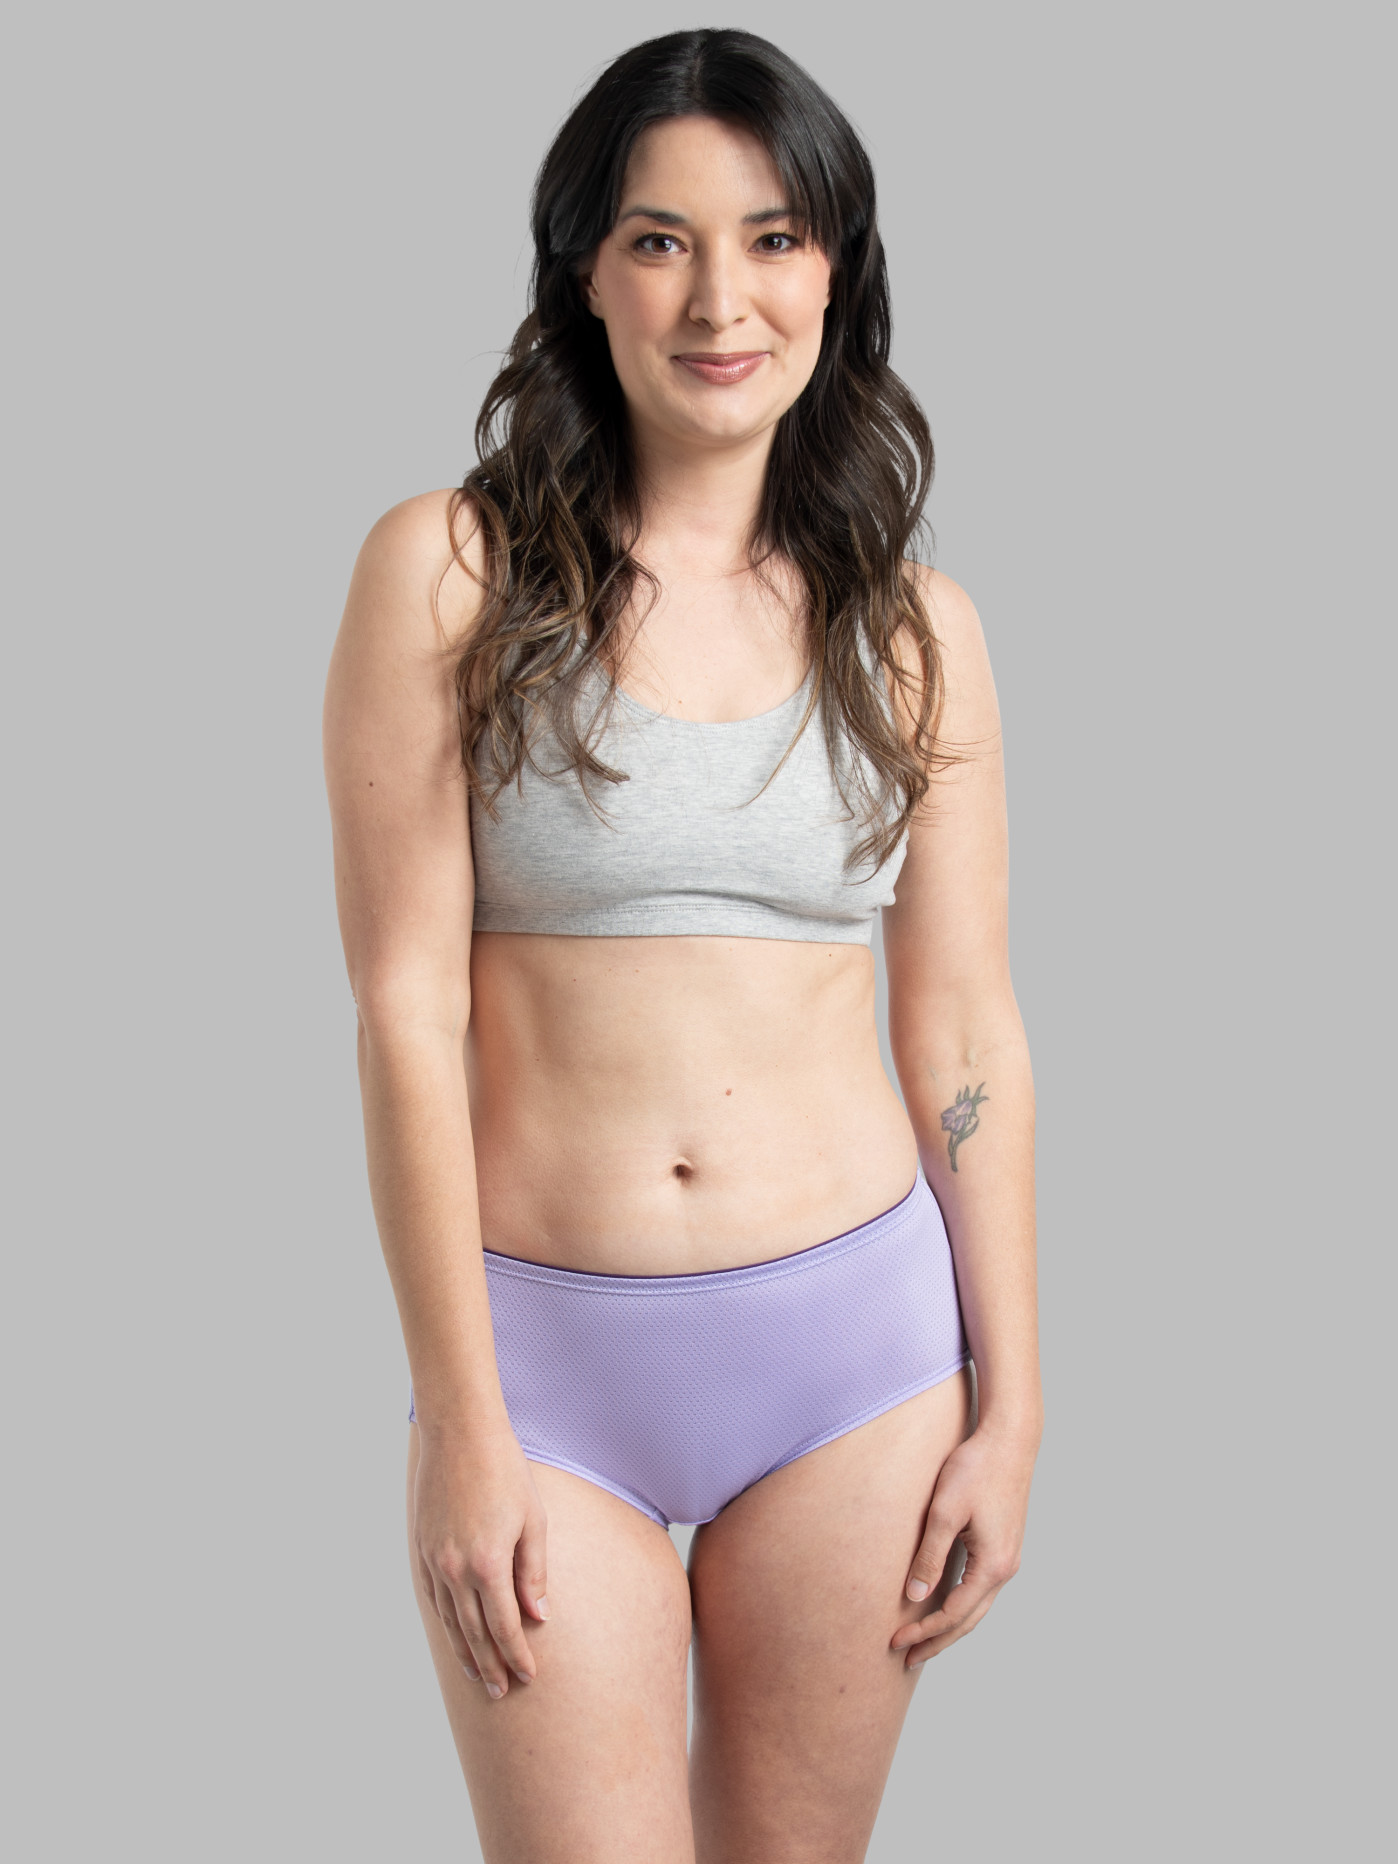 Fruit of the Loom Women's Breathable Seamless Underwear